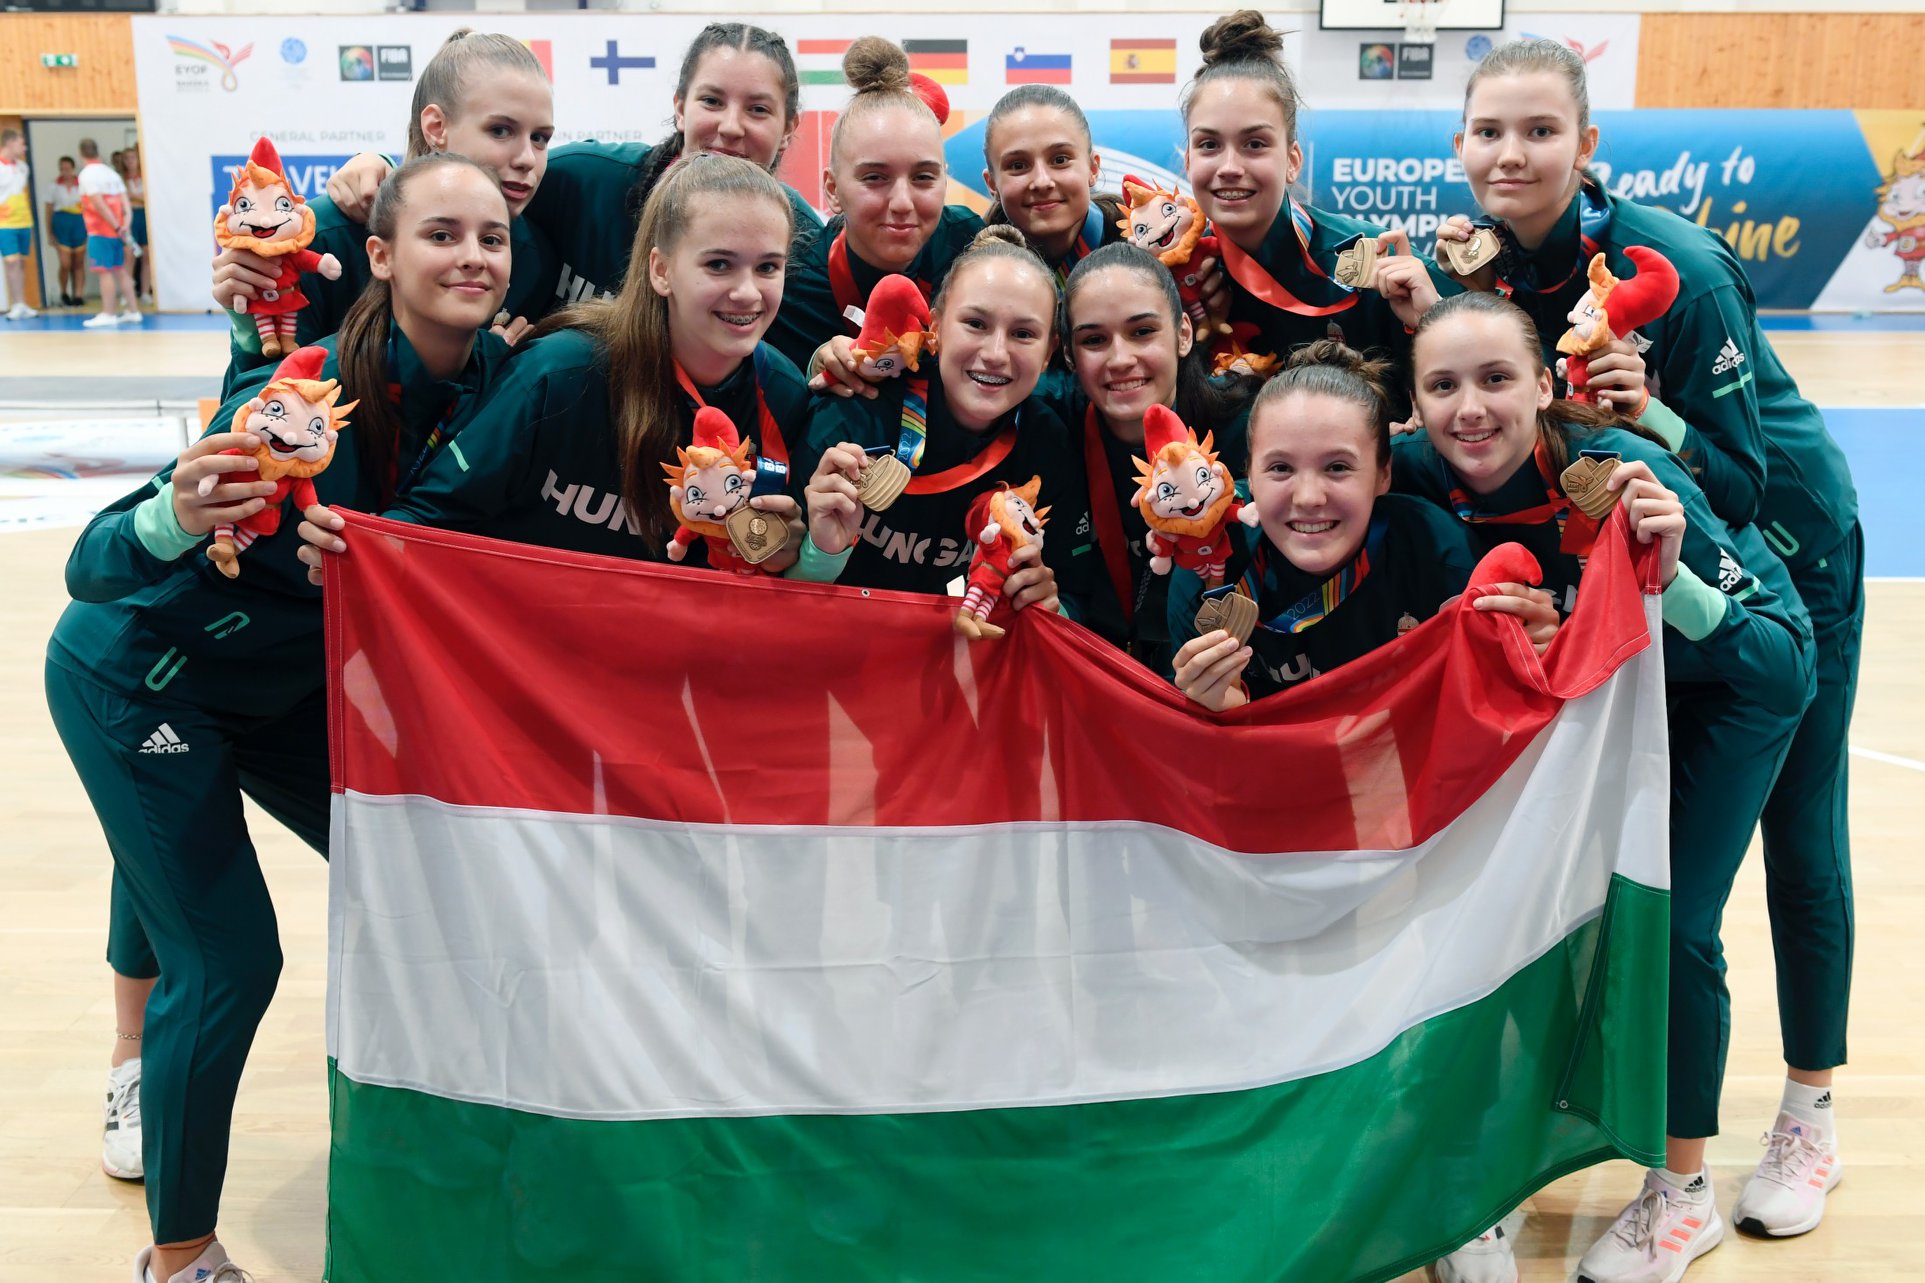 Hungarians Win 24 Medals at European Youth Olympics Festival